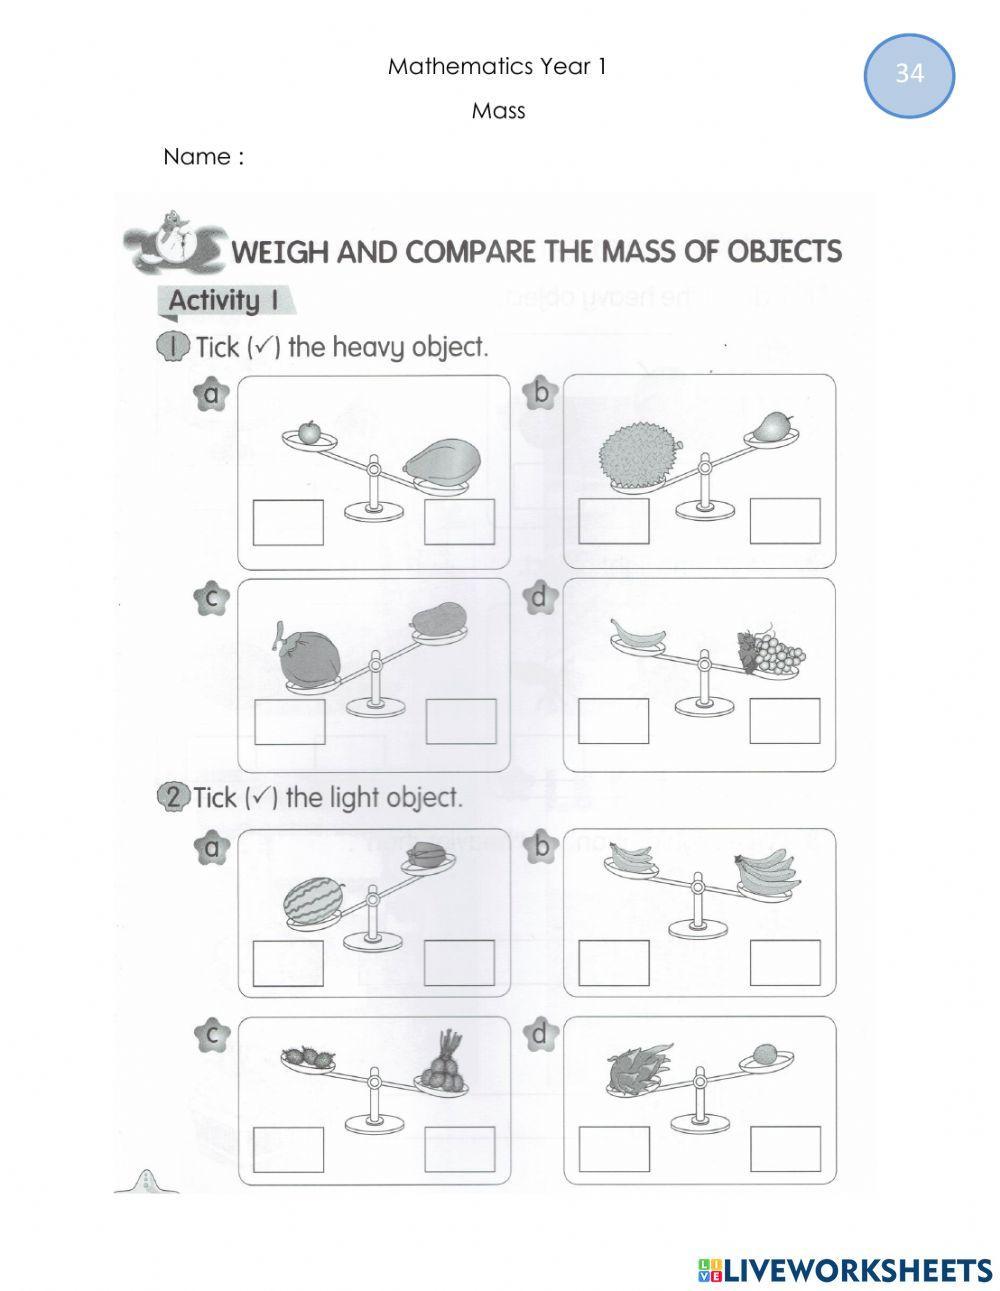 Weigh and compare the mass of objects